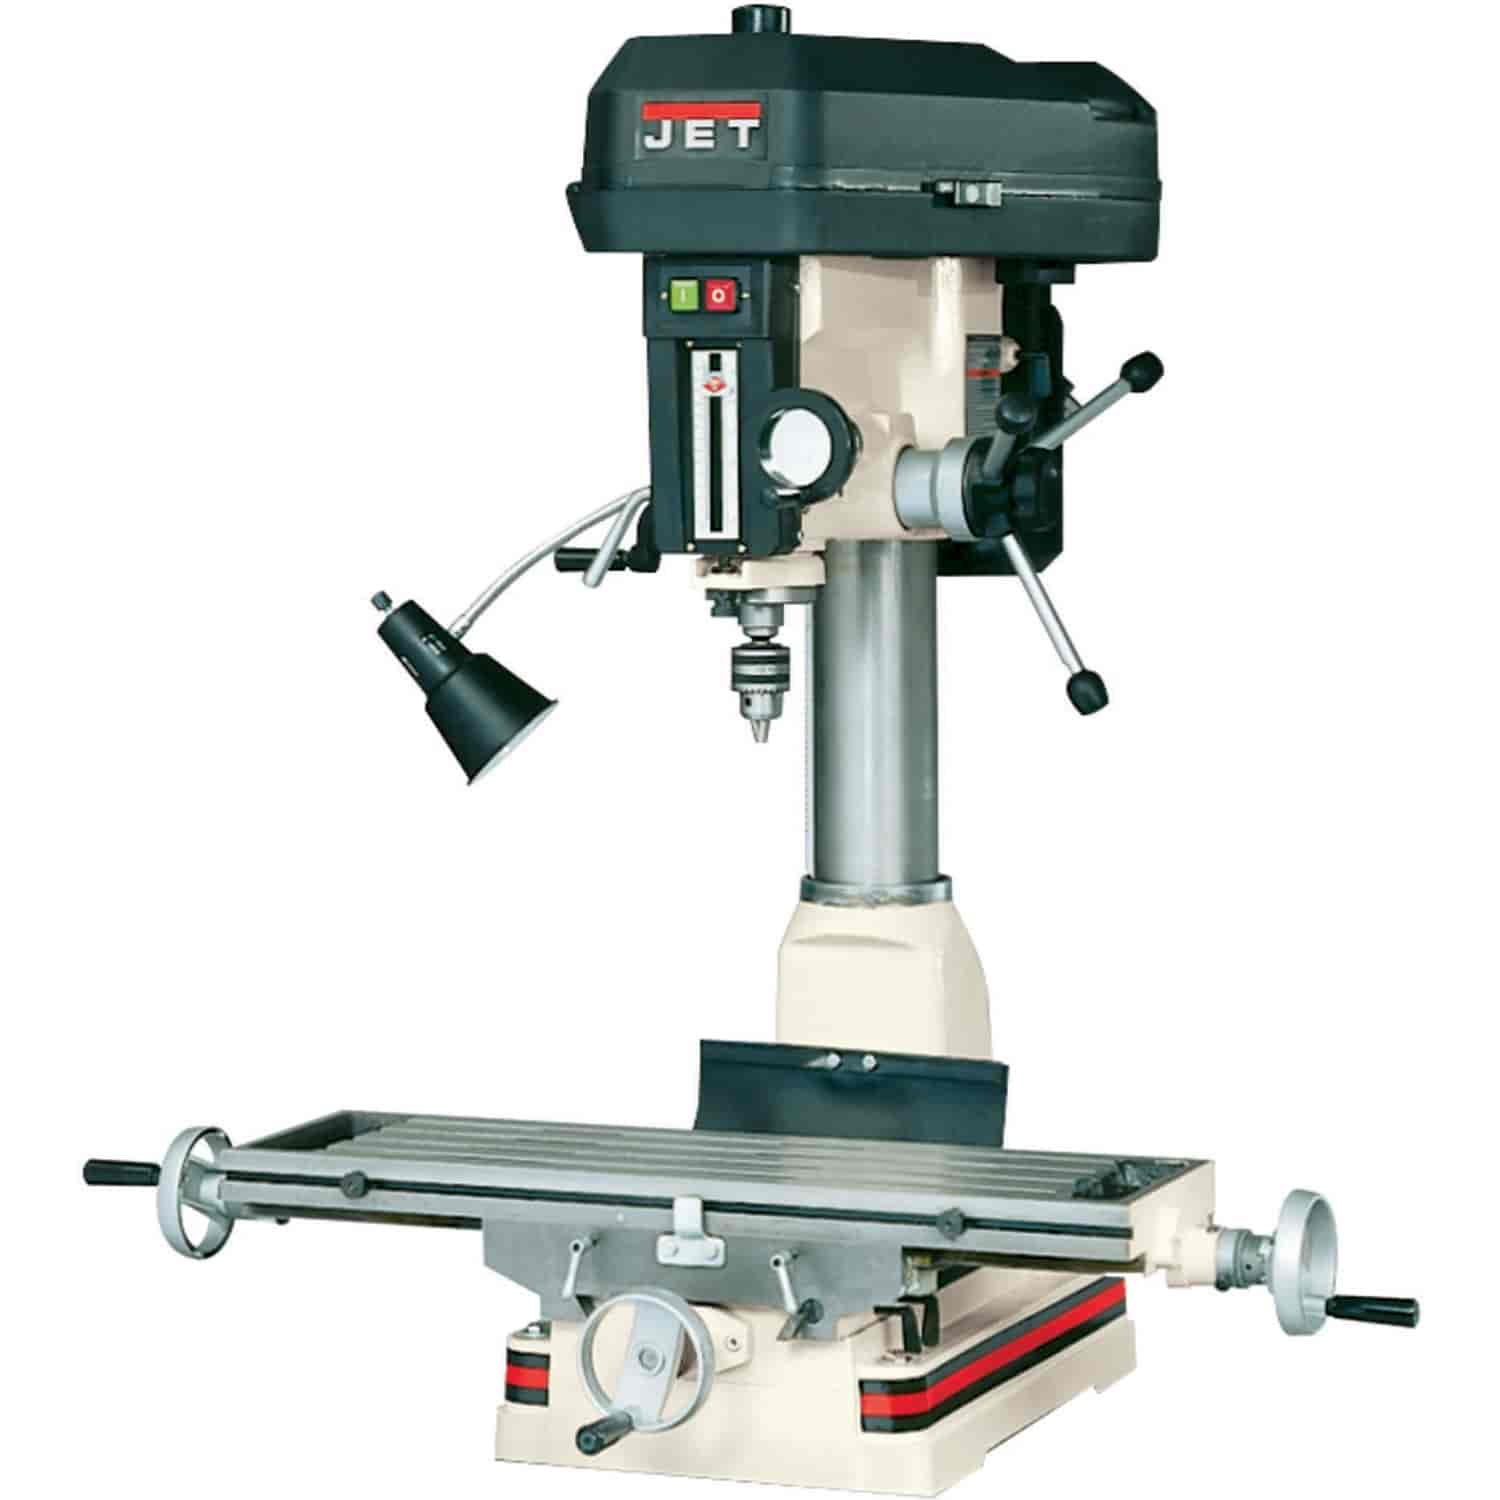 JMD-15 Mill/Drill With ACU-RITE VUE DRO